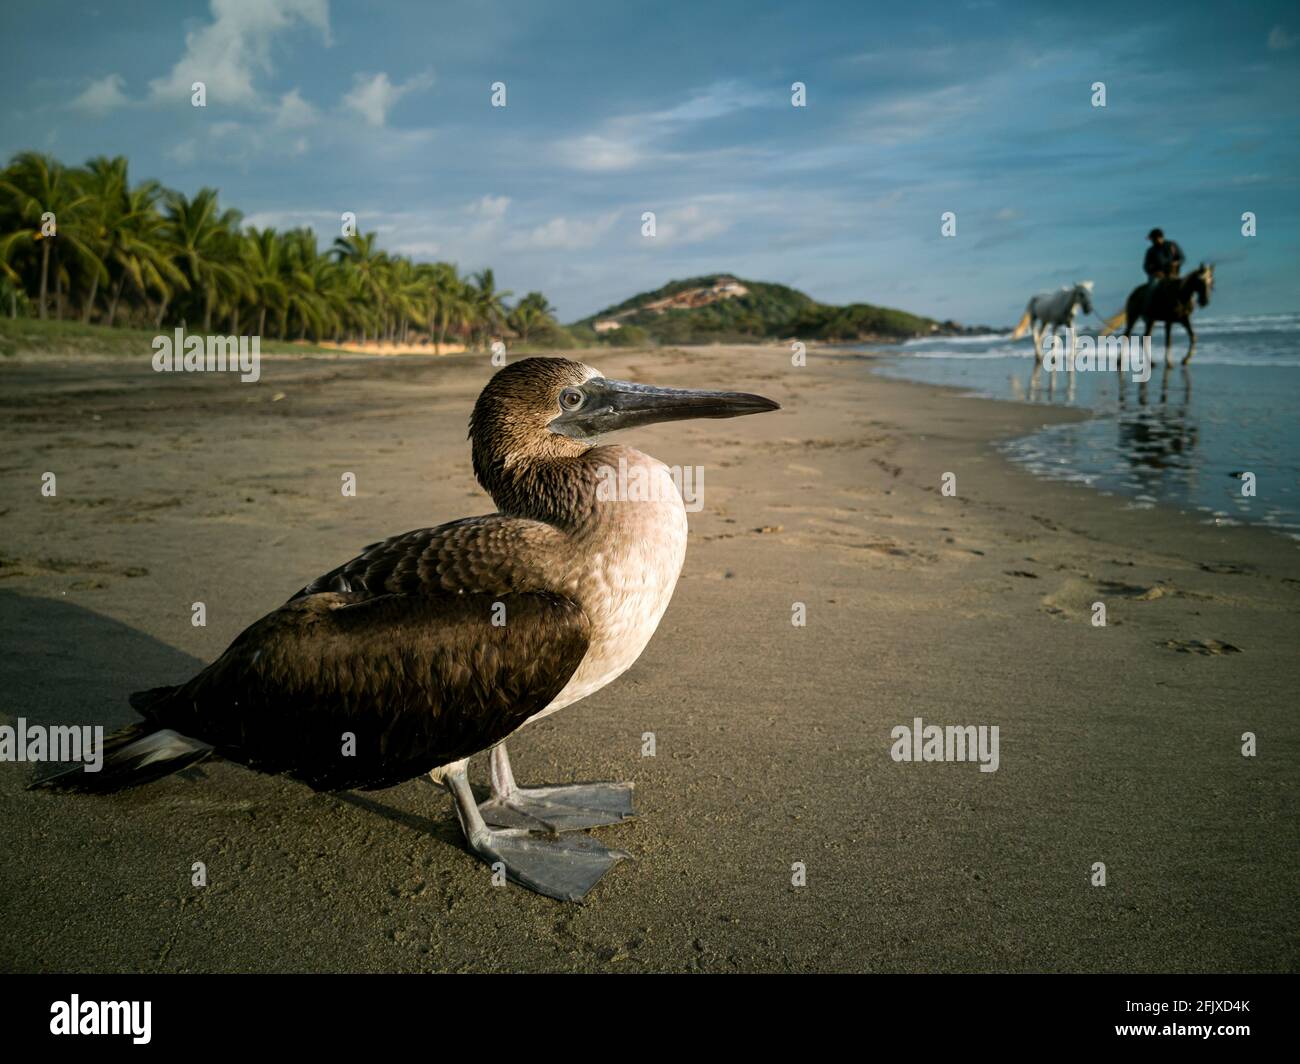 Pelican resting on the seashore and horses in the background Stock Photo